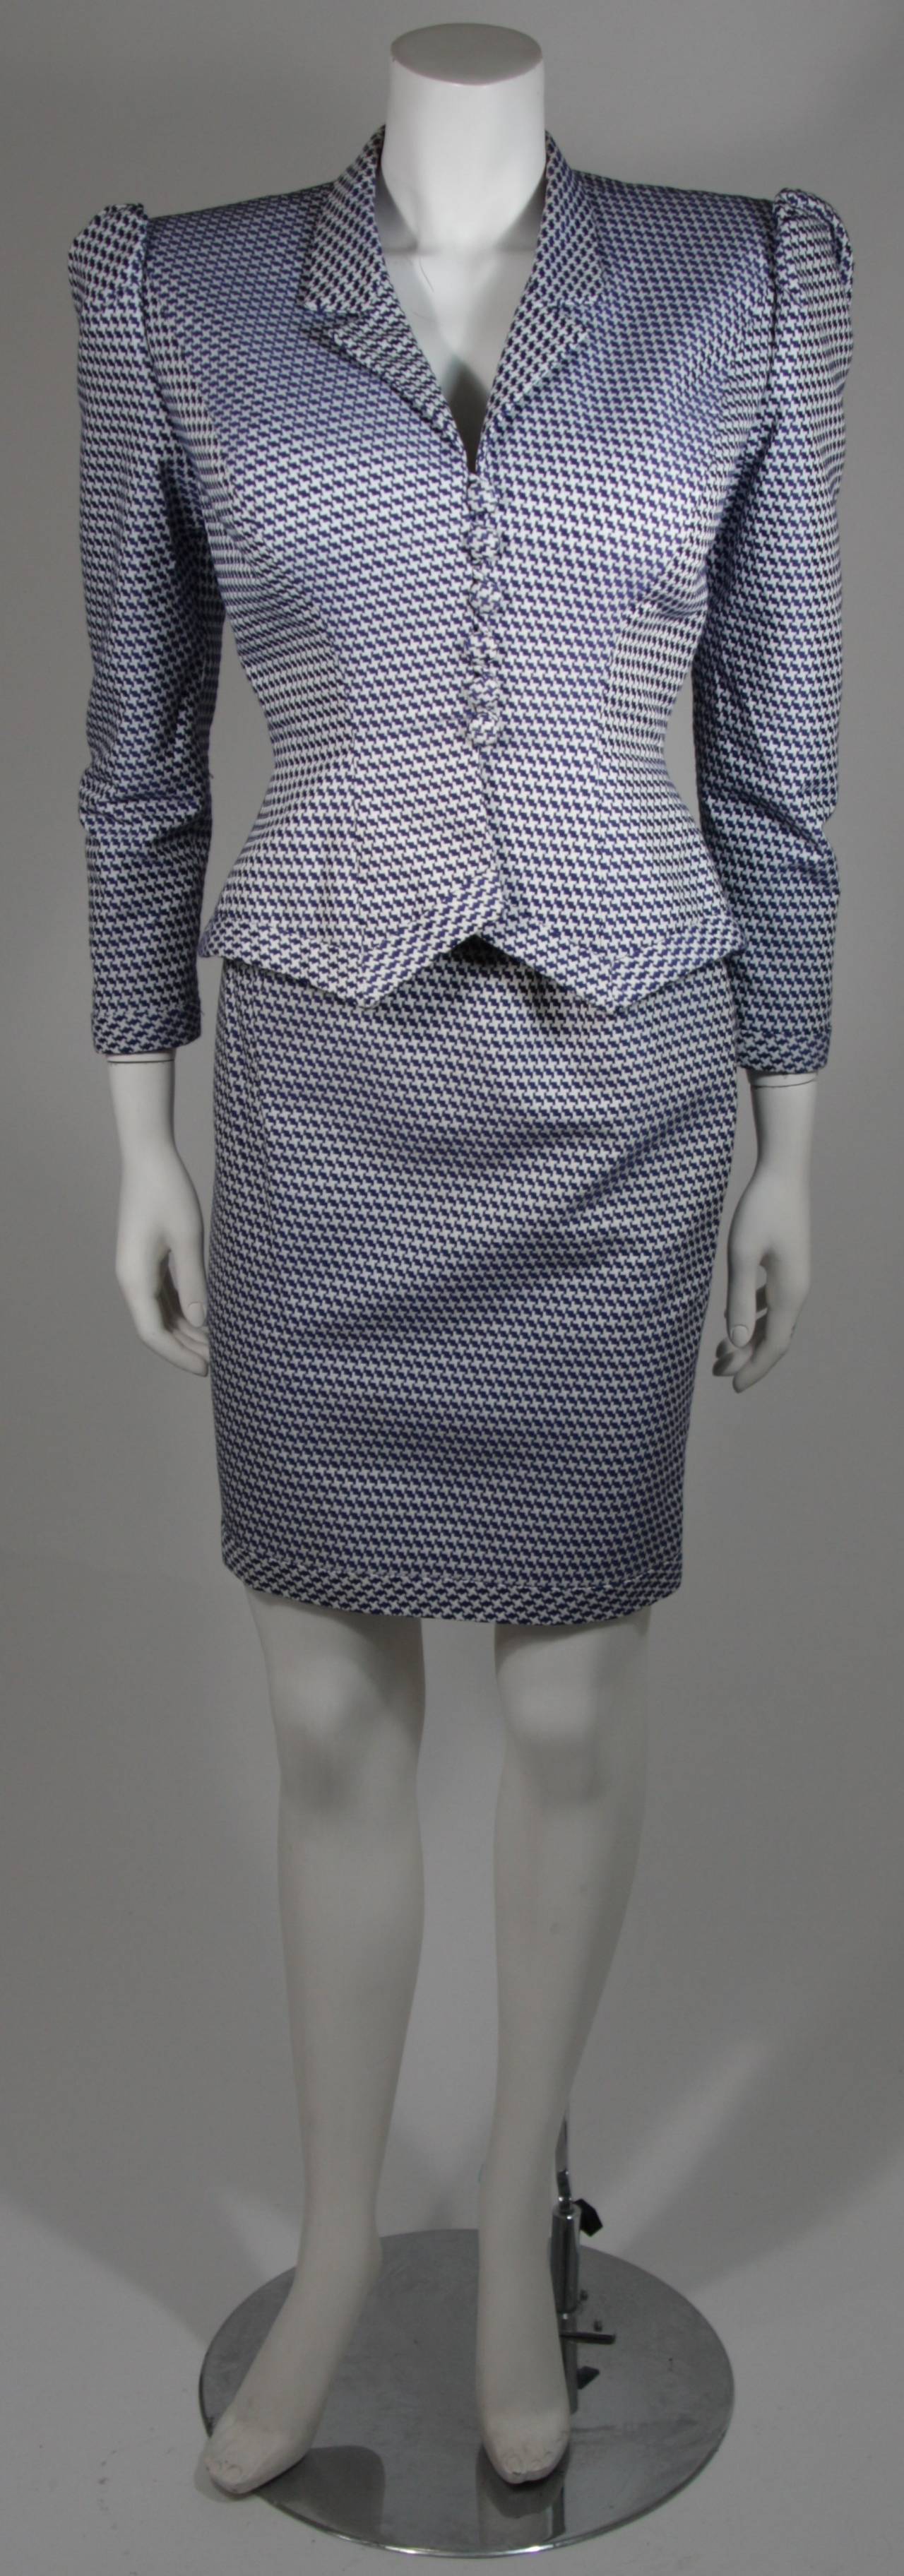 Stunning royal blue and white hounds tooth suit with sculpted shoulders, fabric covered button front, fitted waist with point detail at the hem of the jacket. The skirt is fitted. Both pieces are fully lined in blue silk and hand finished. The body